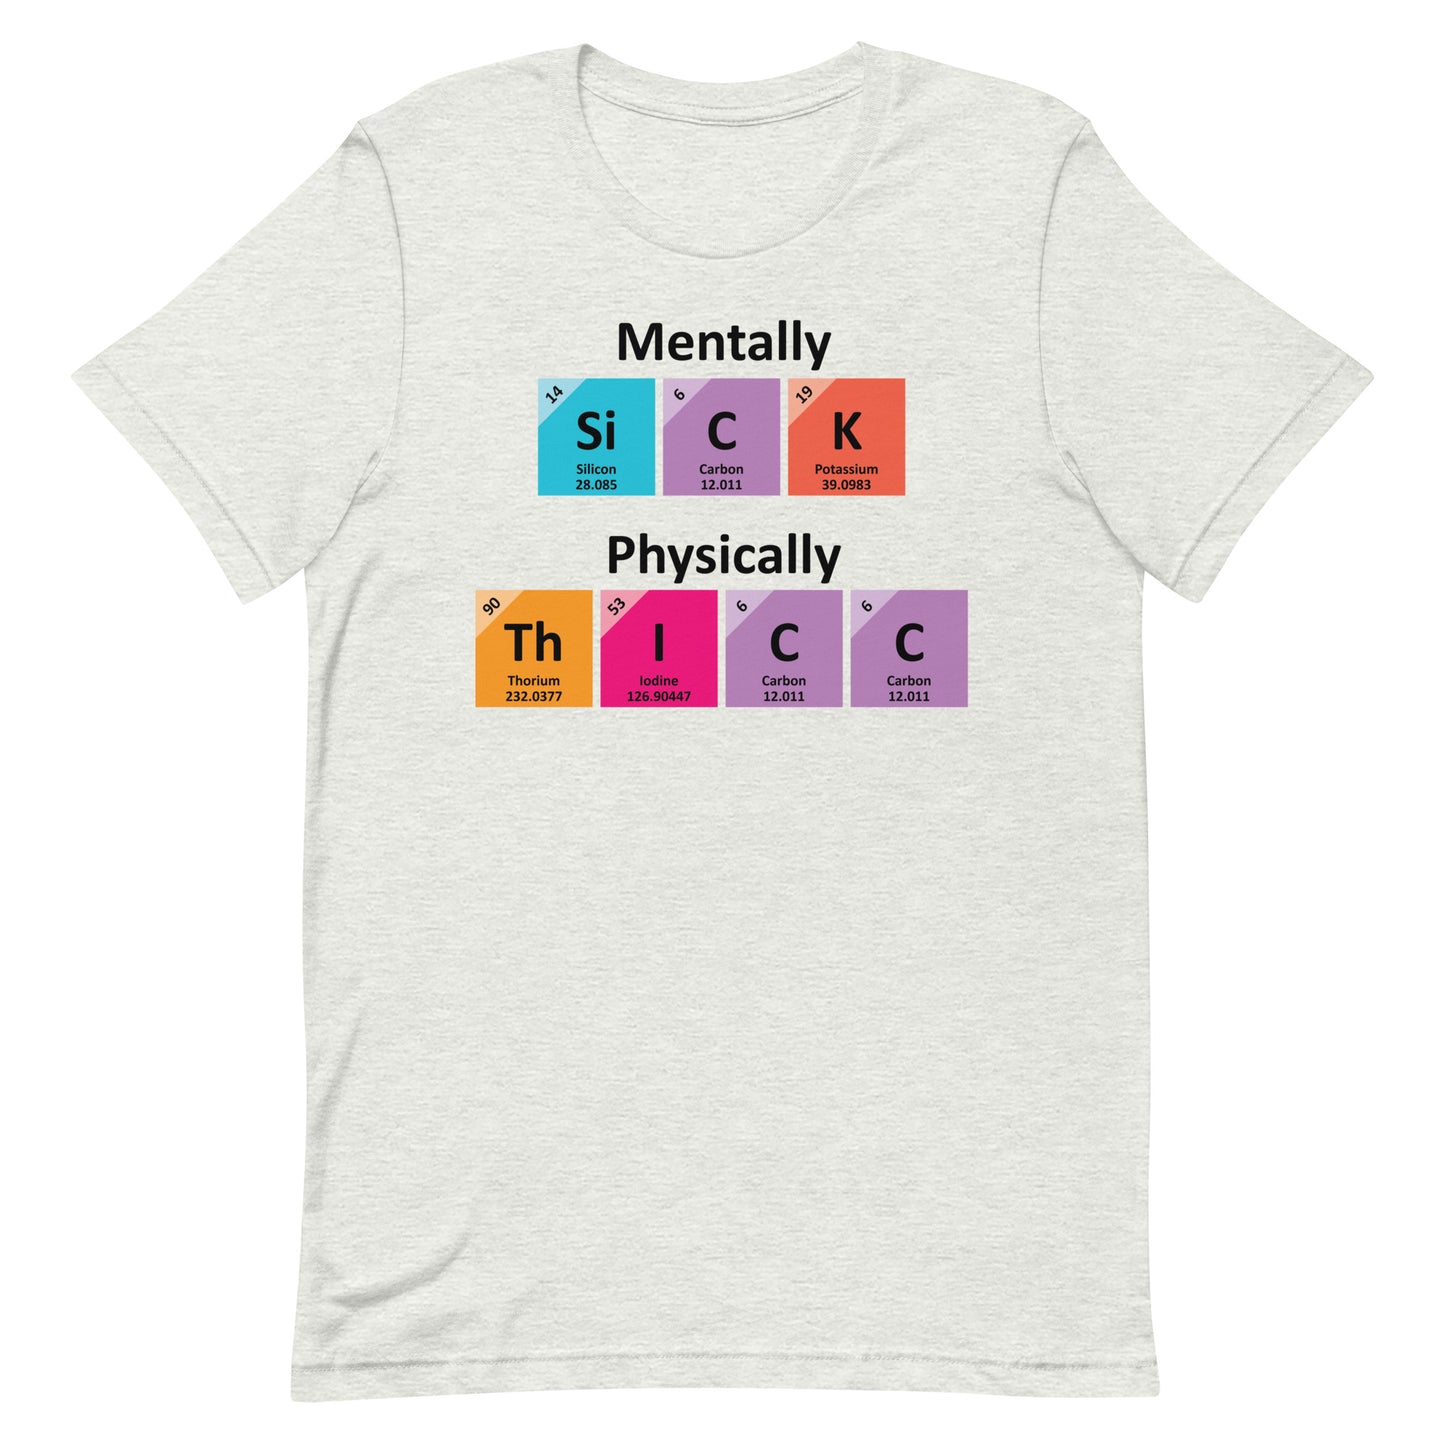 Mentally SiCK Physically ThICC Unisex t-shirt